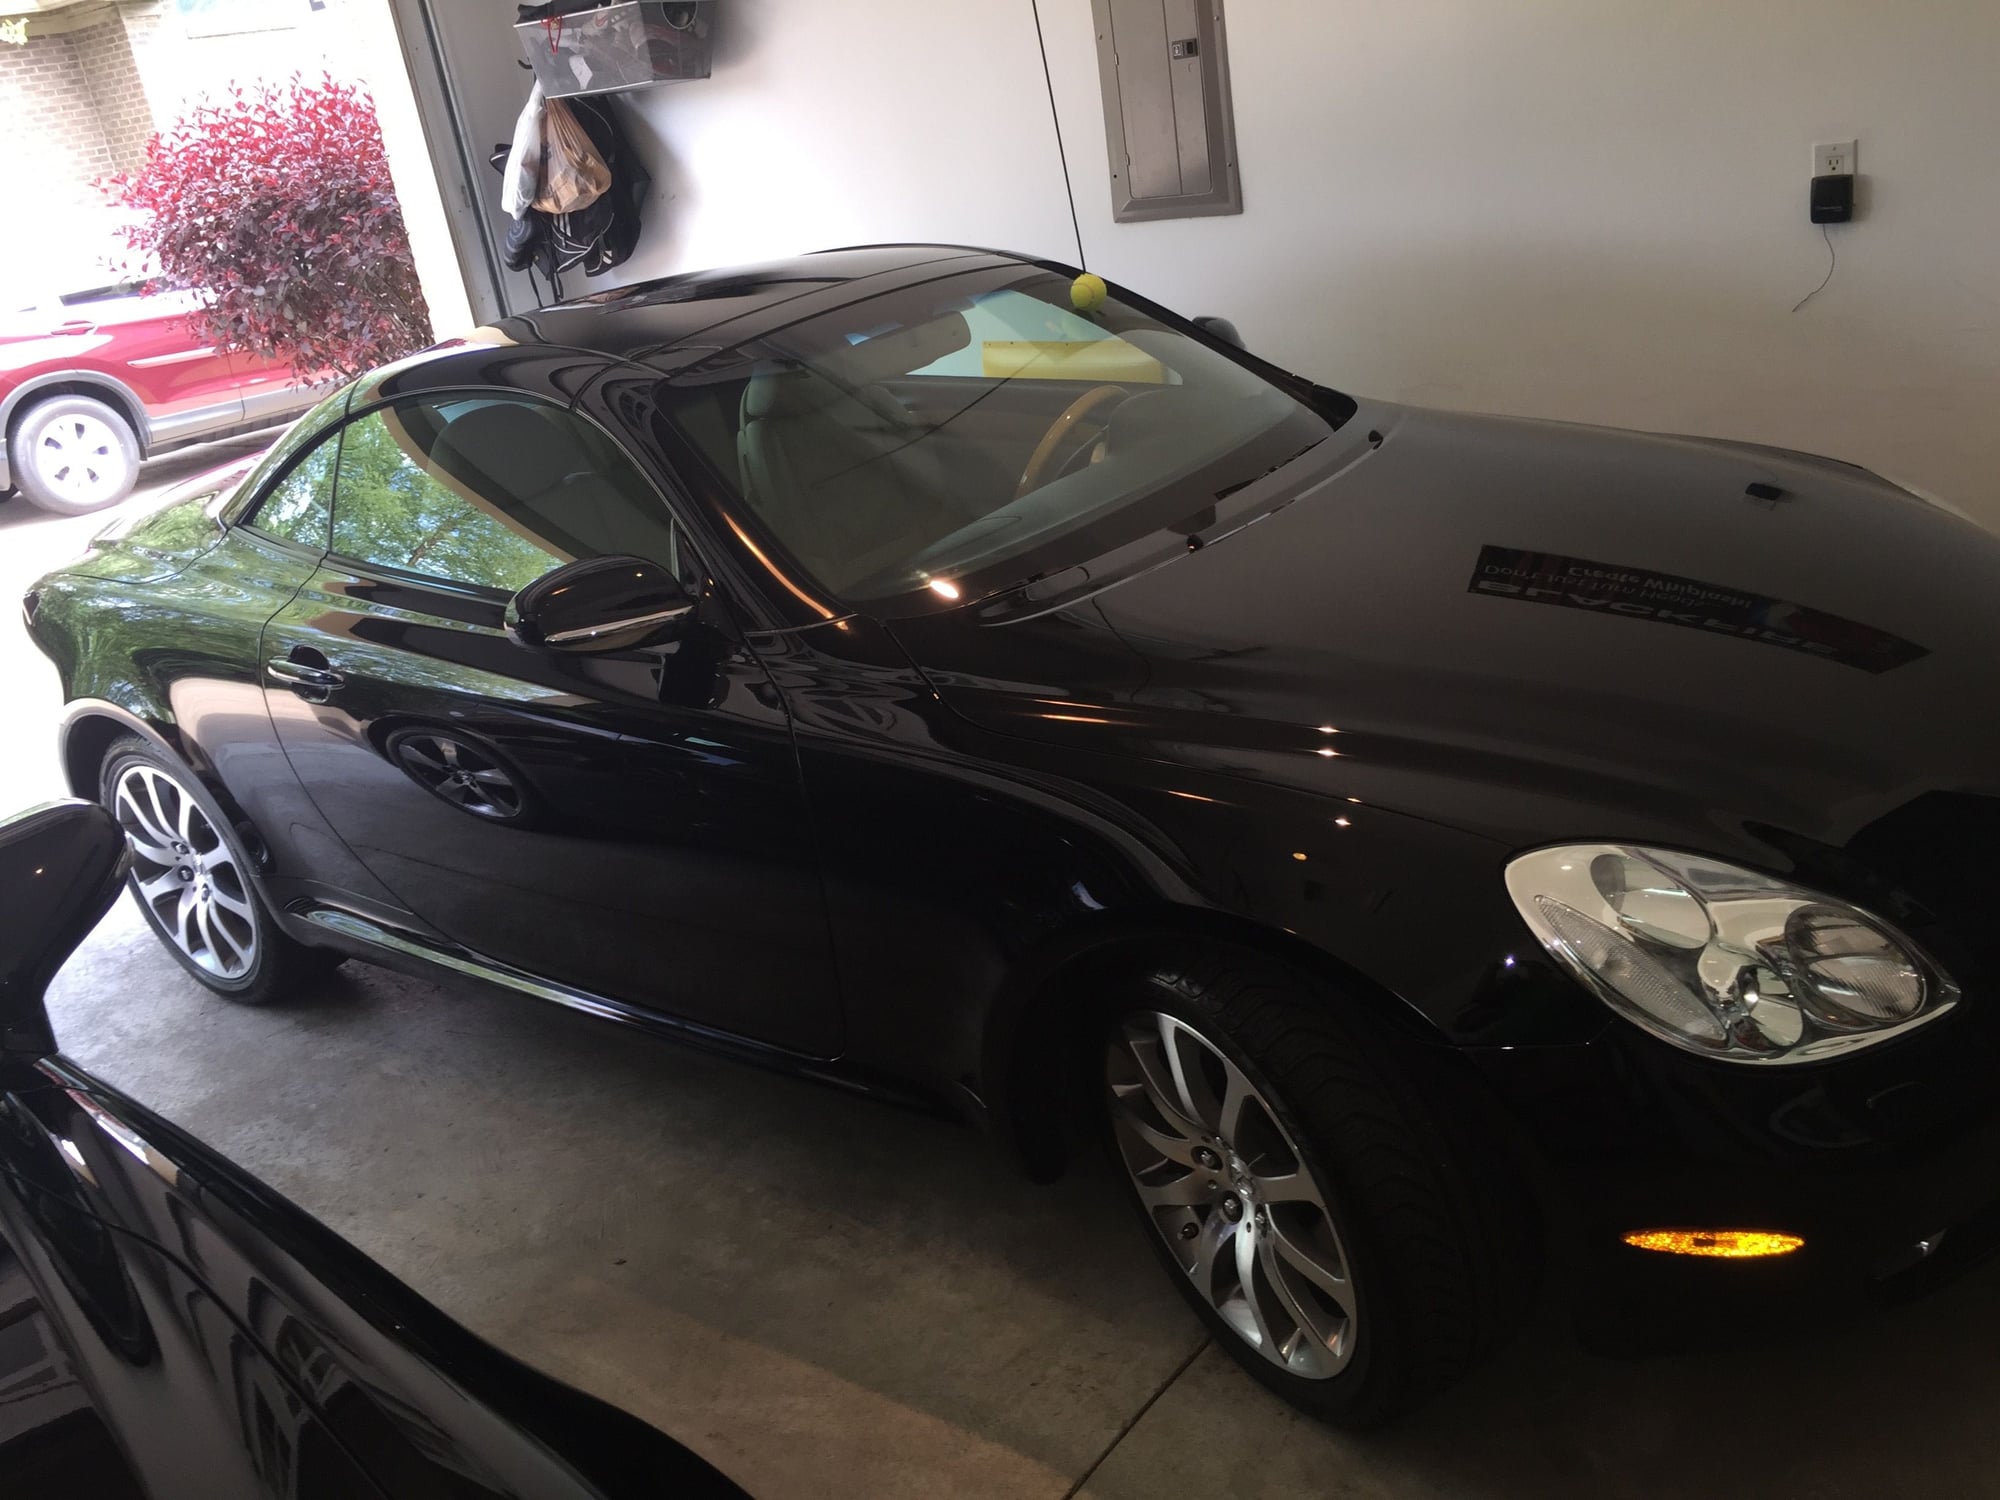 2002 Lexus SC430 - OH:  2002 Lexus SC430 Convertible - 55k miles - Used - VIN JTHFN48Y220029515 - 55,000 Miles - 8 cyl - 2WD - Automatic - Convertible - Black - Mason, OH 45040, United States